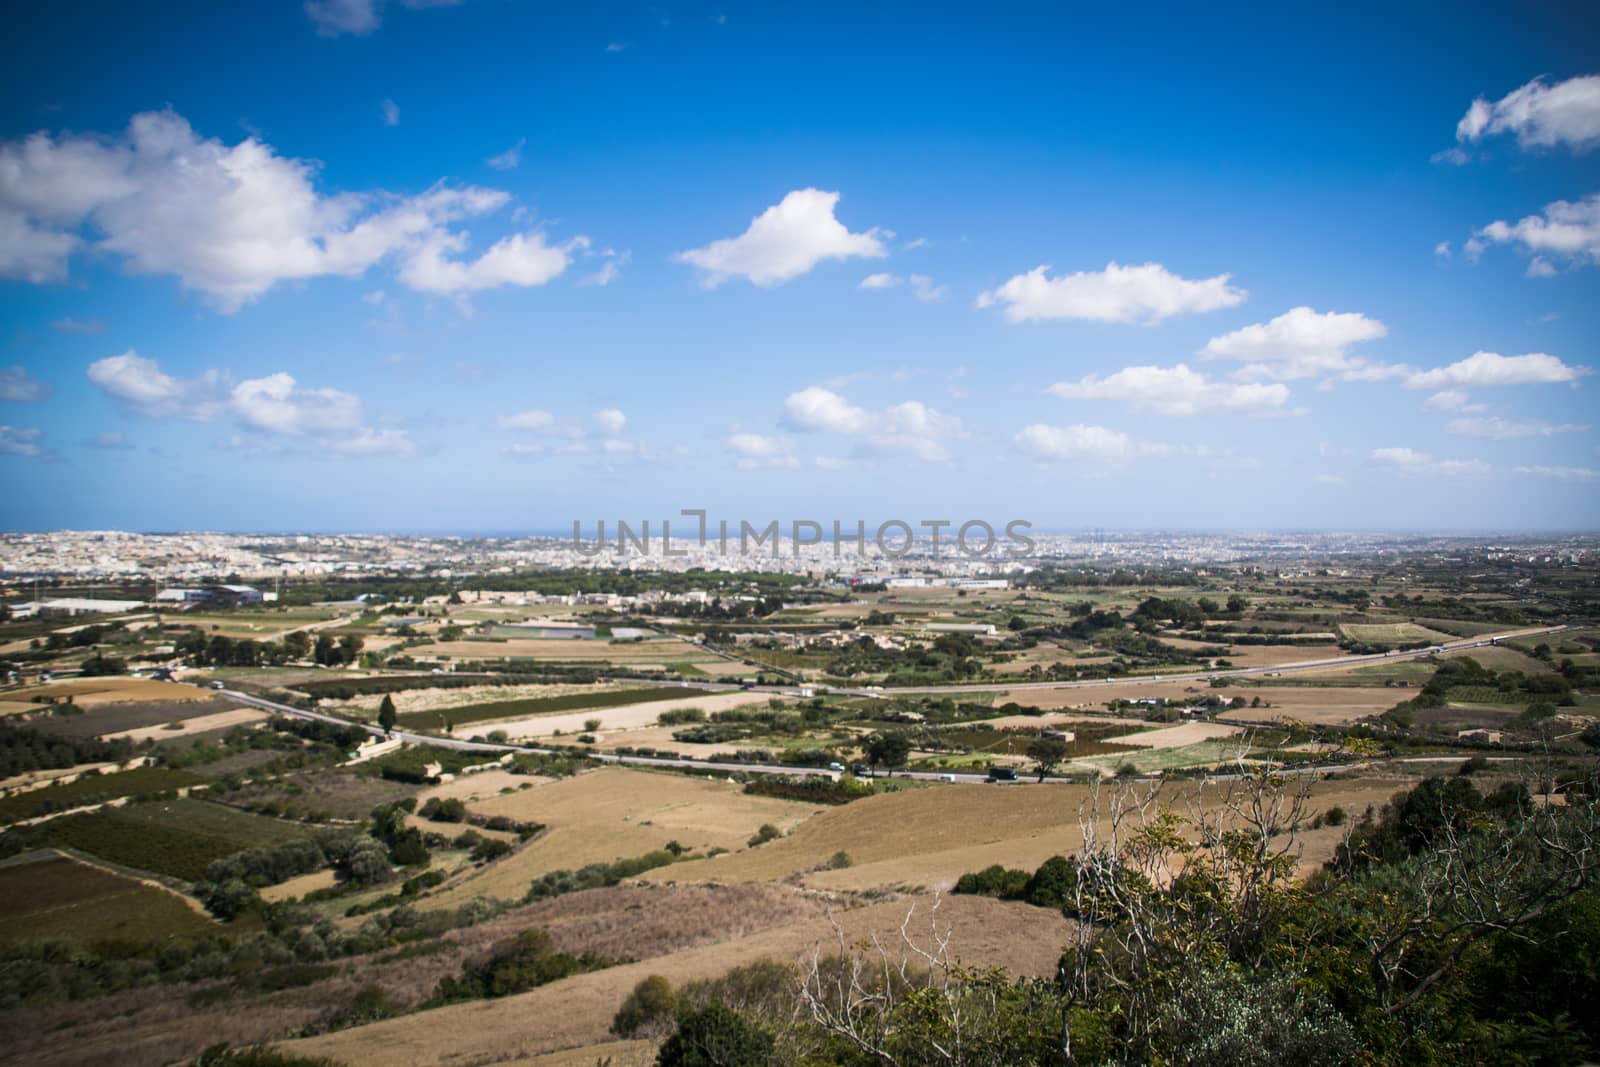 View from the old capital of Malta, Mdina 2019